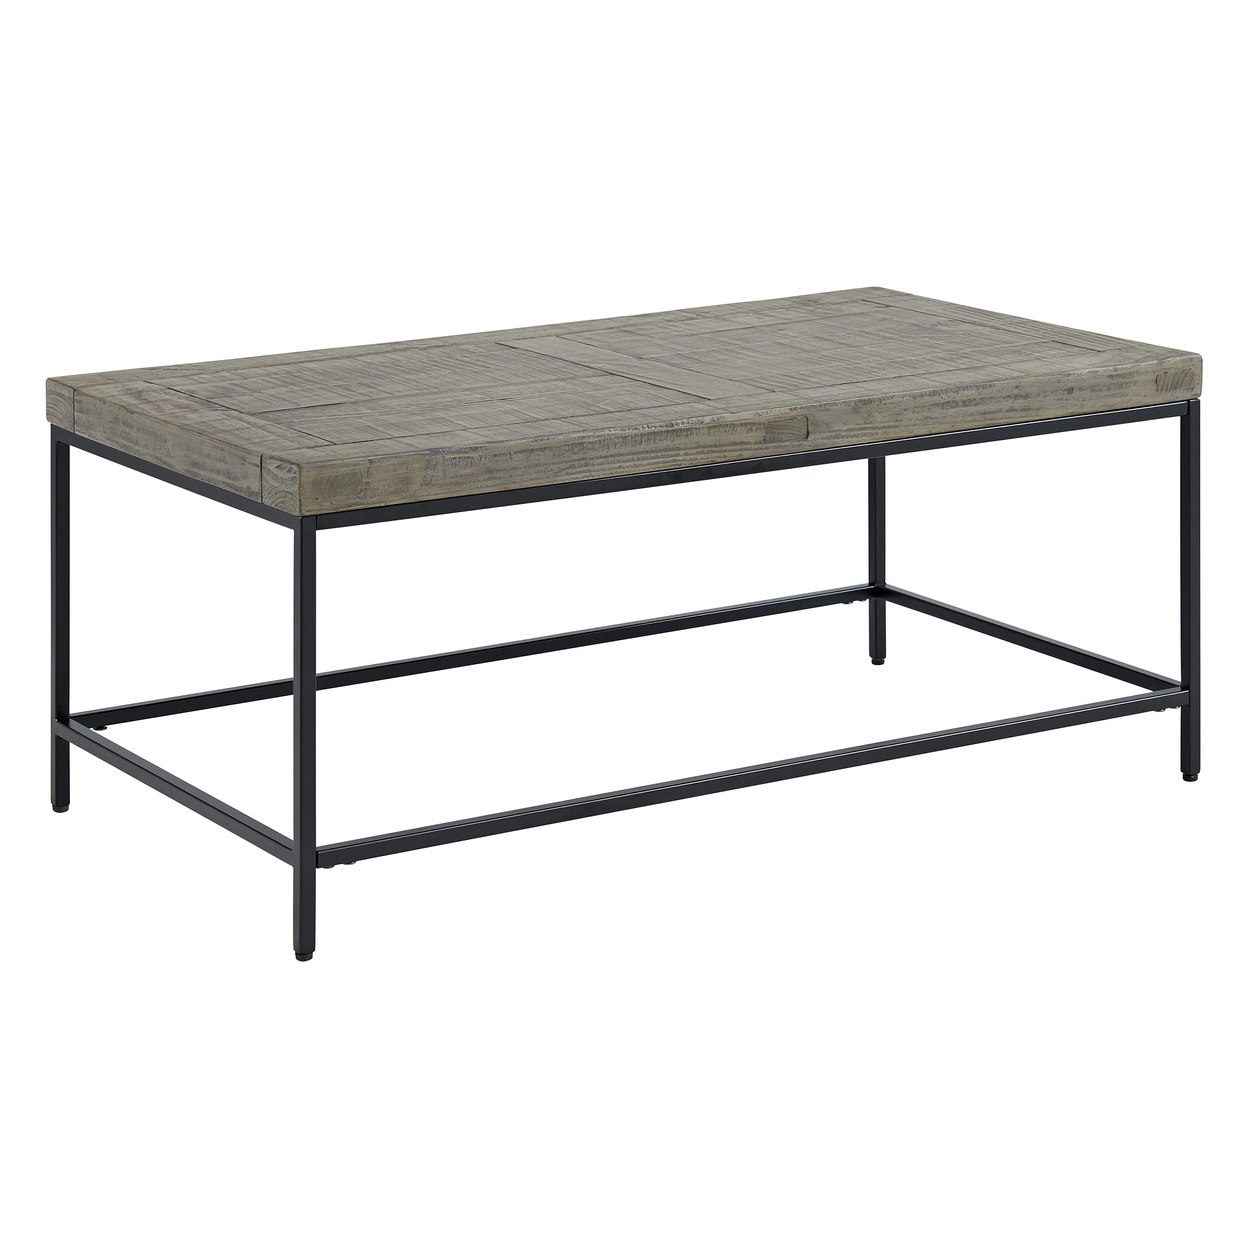 Coffee Table 41 X 23 In Wood Top Metal Base 18 Inch High Home Dcor Living Room